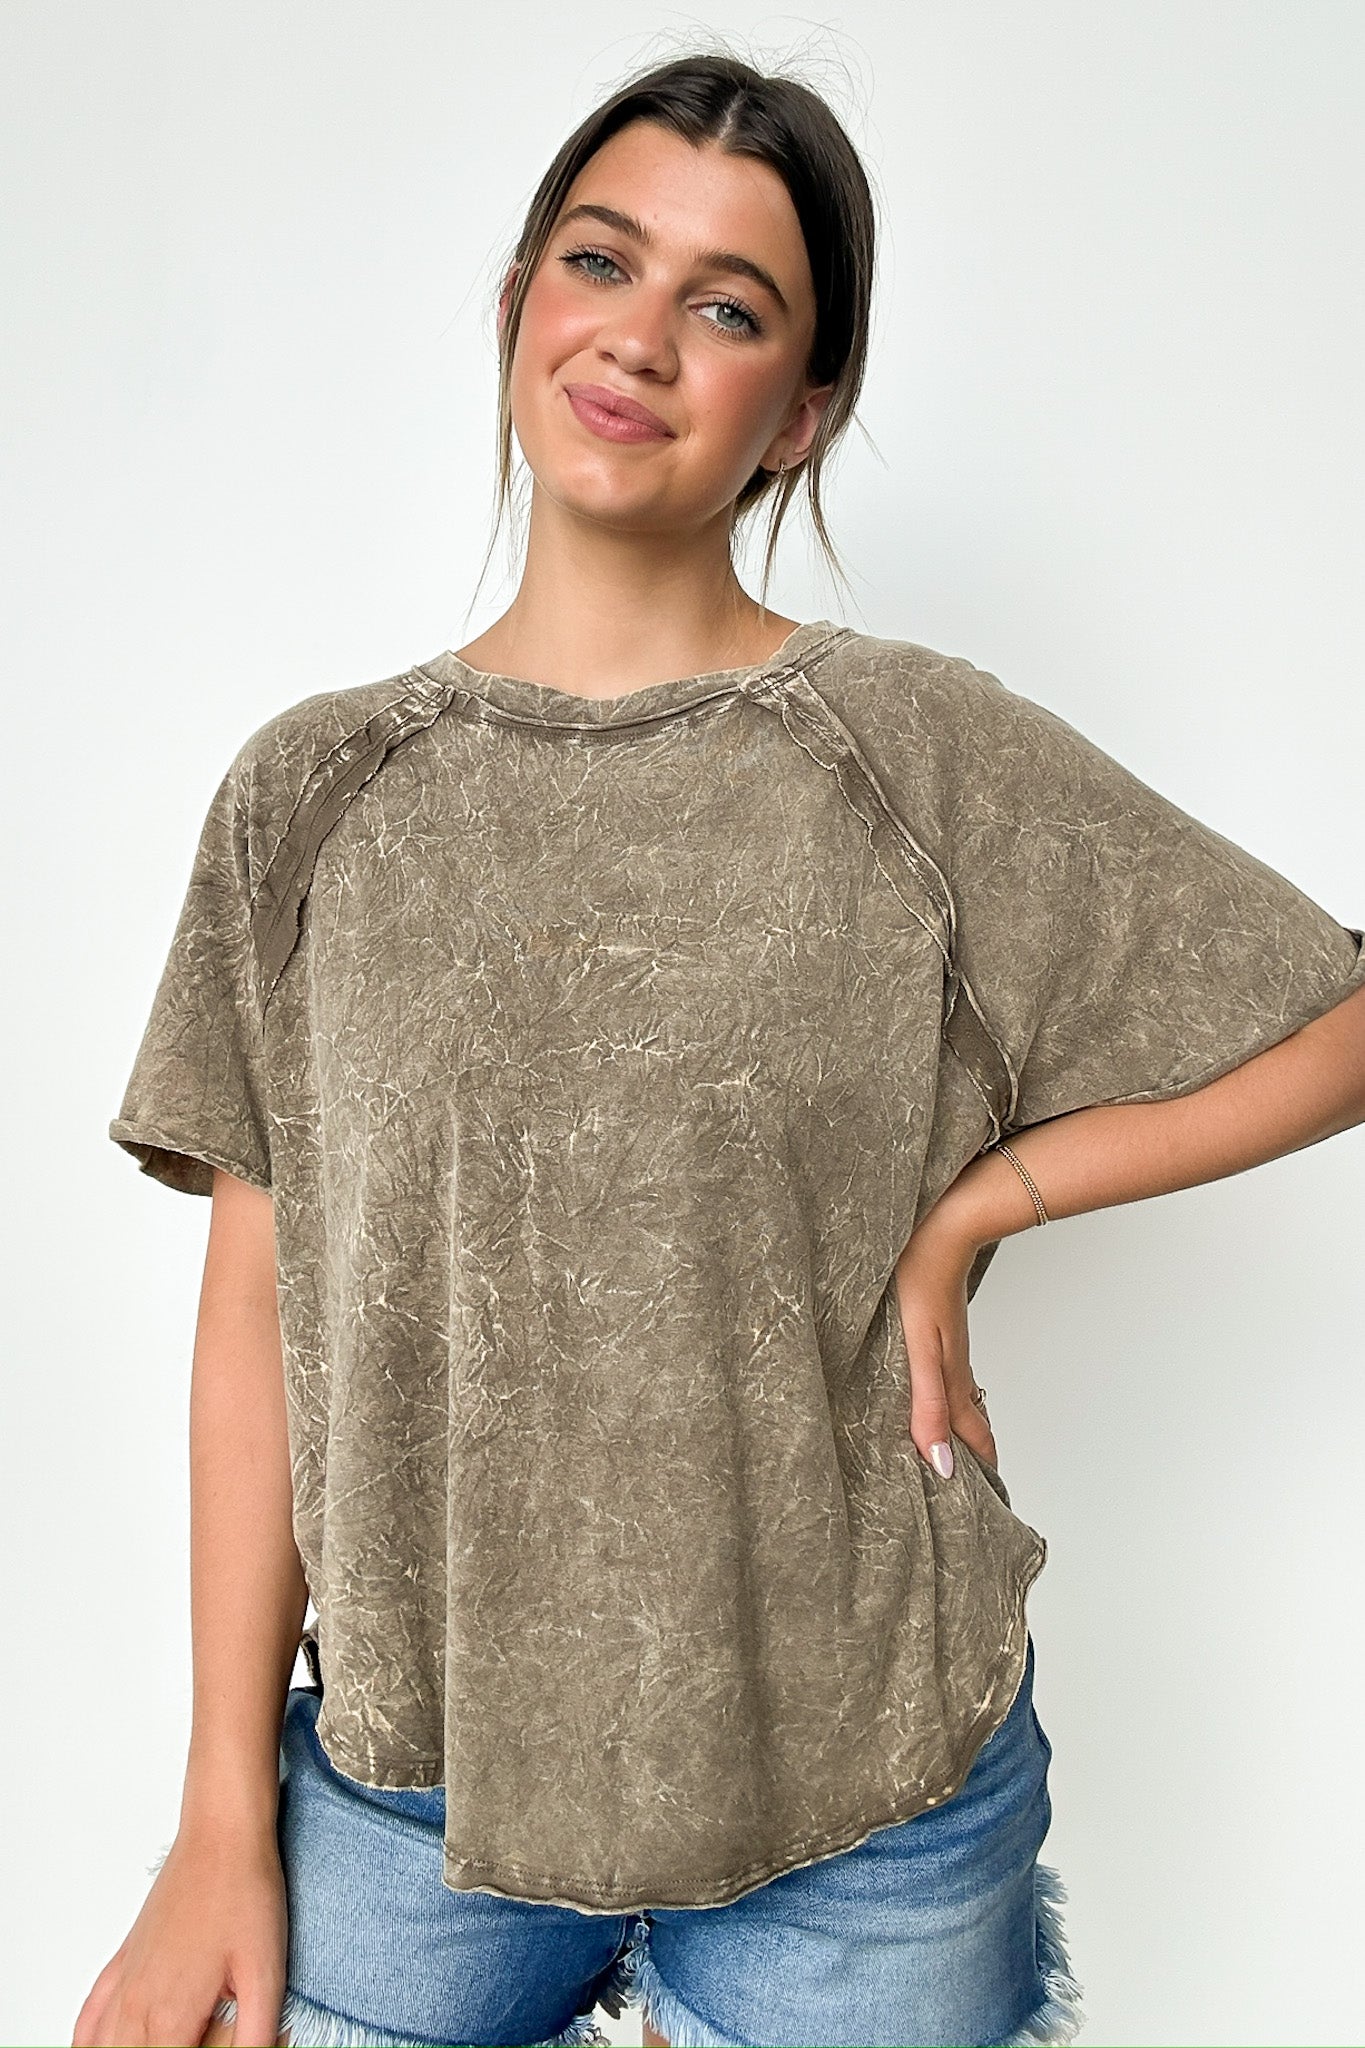 Carowyn Mineral Wash Relaxed Fit Top - BACK IN STOCK